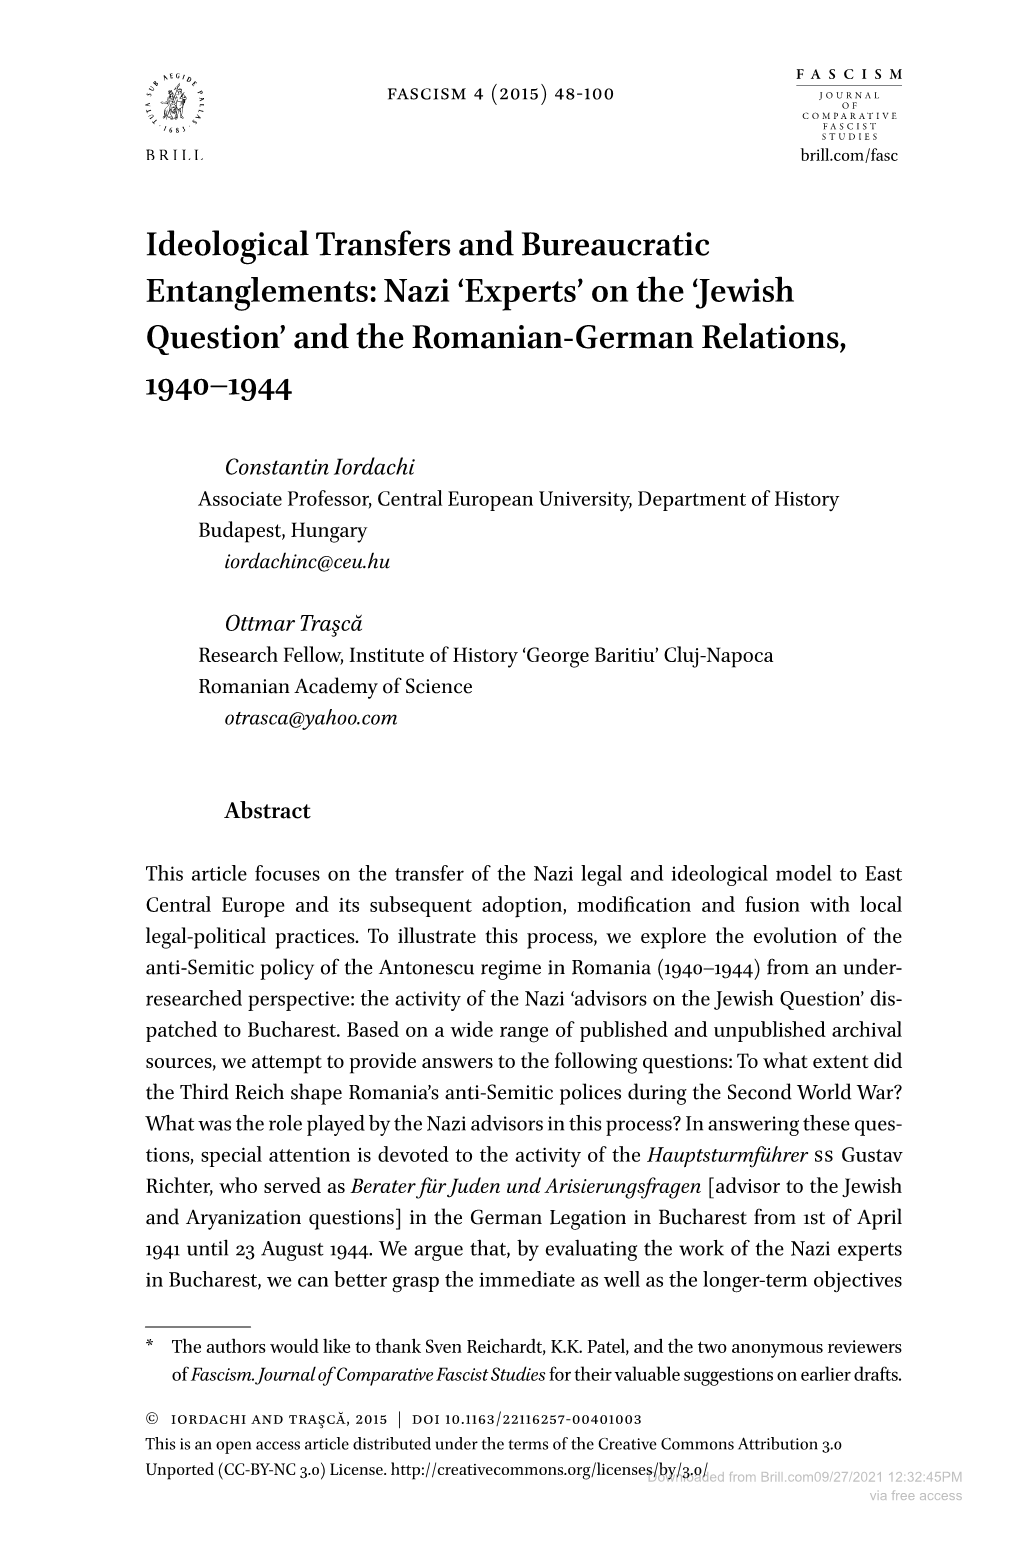 Nazi ‘Experts’ on the ‘Jewish Question’ and the Romanian-German Relations, 1940–1944